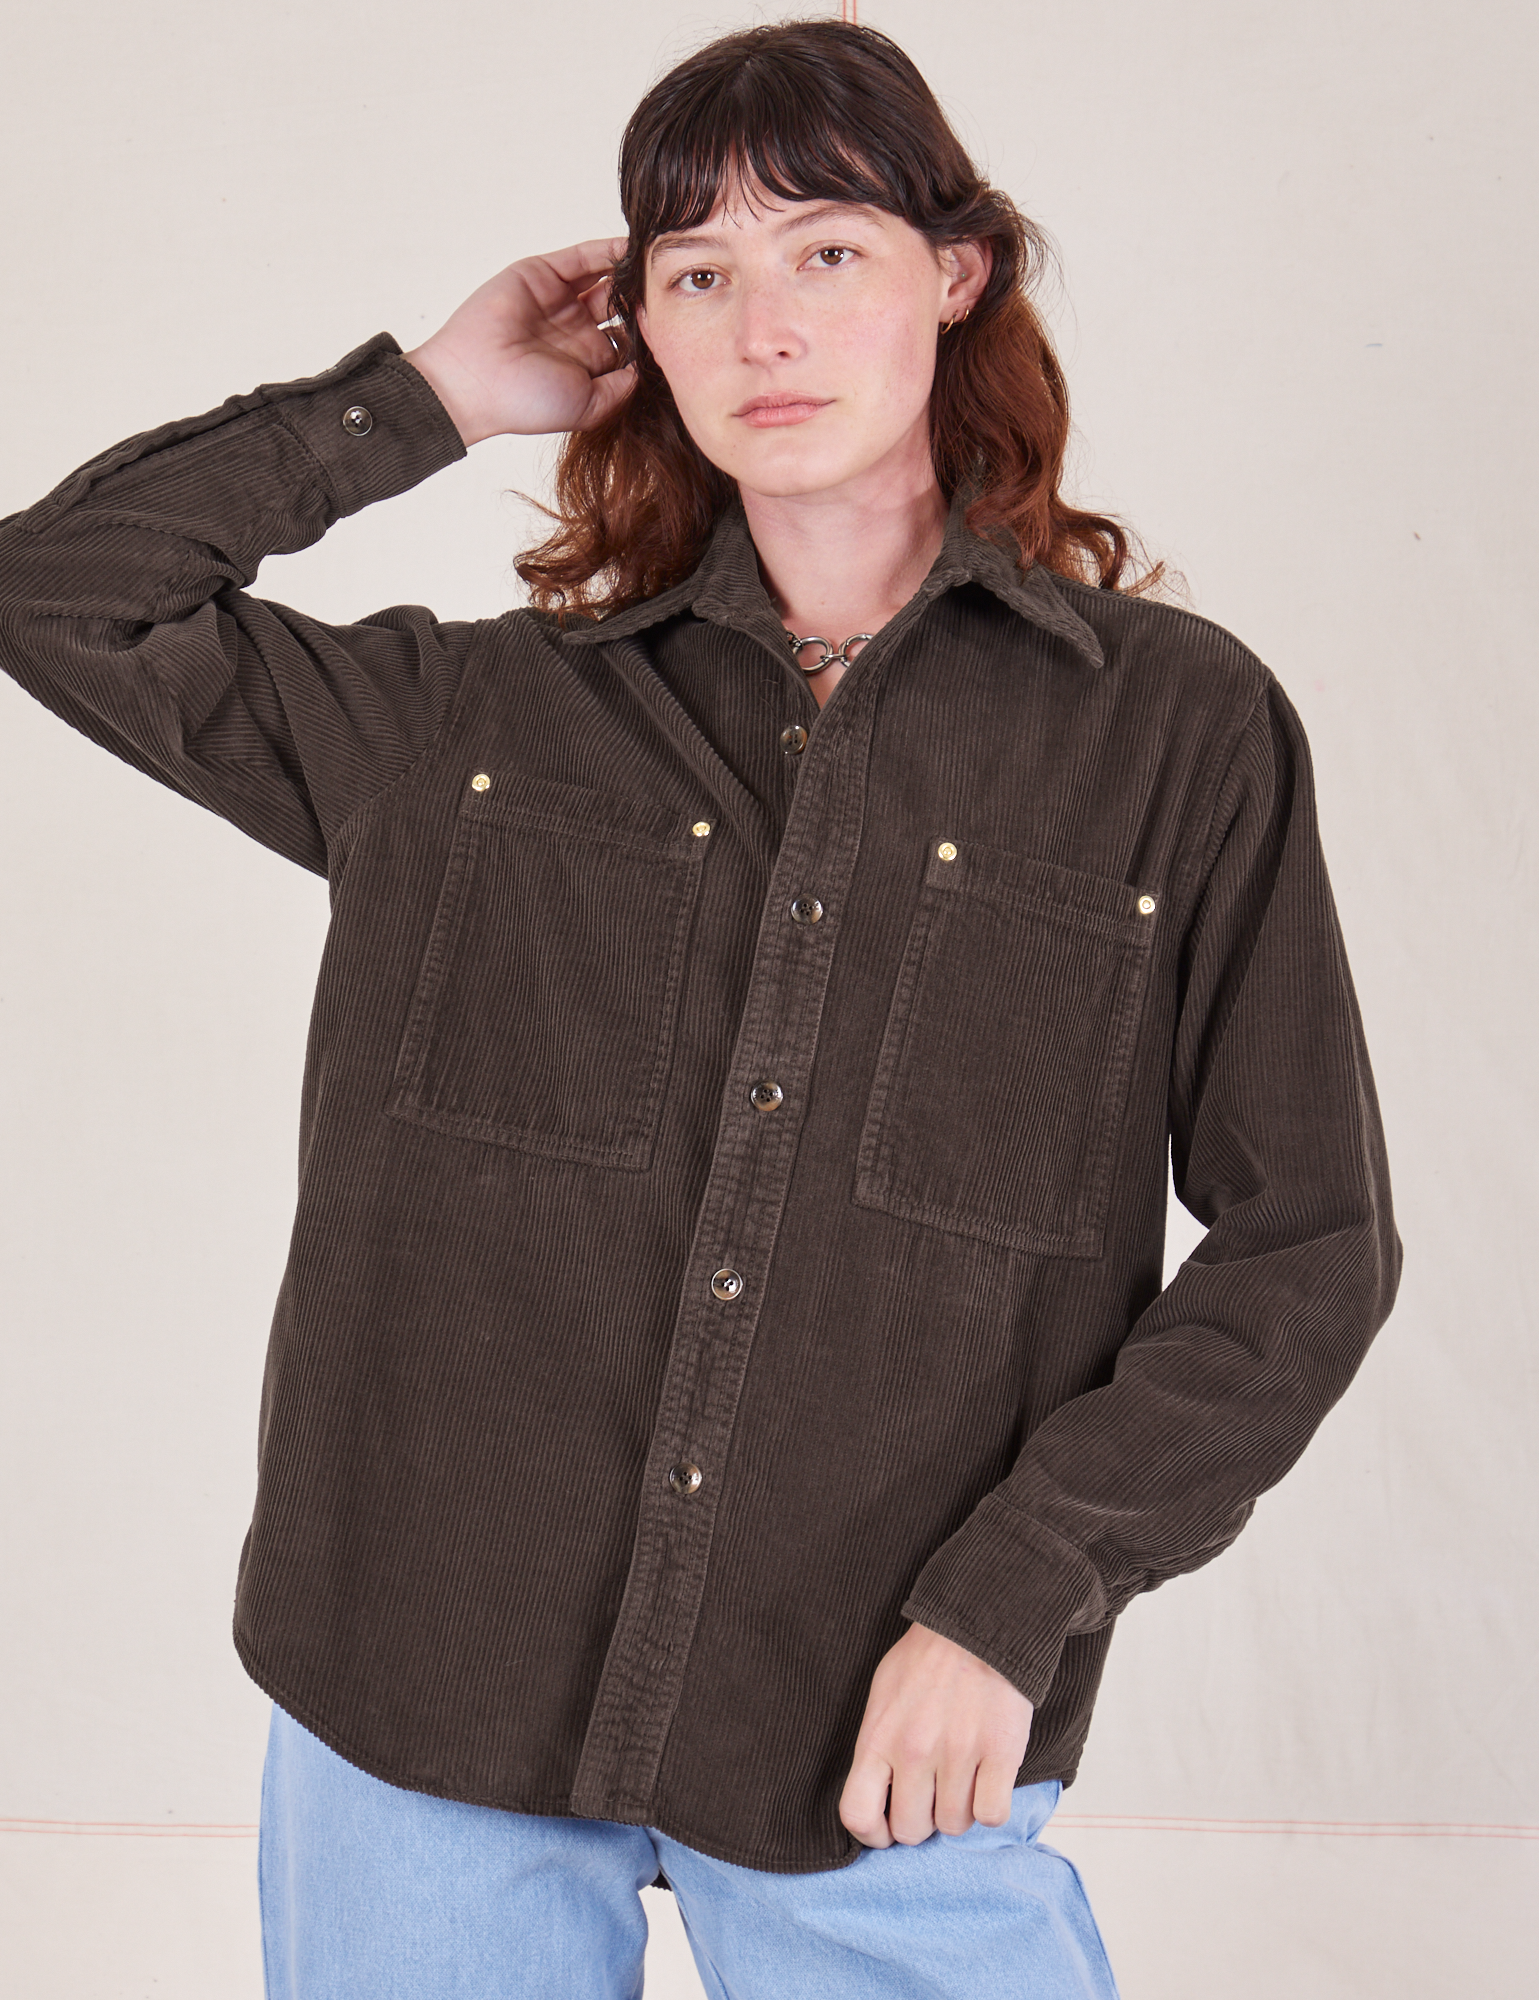 Alex is 5&#39;8&quot; and wearing P Corduroy Overshirt in Espresso Brown